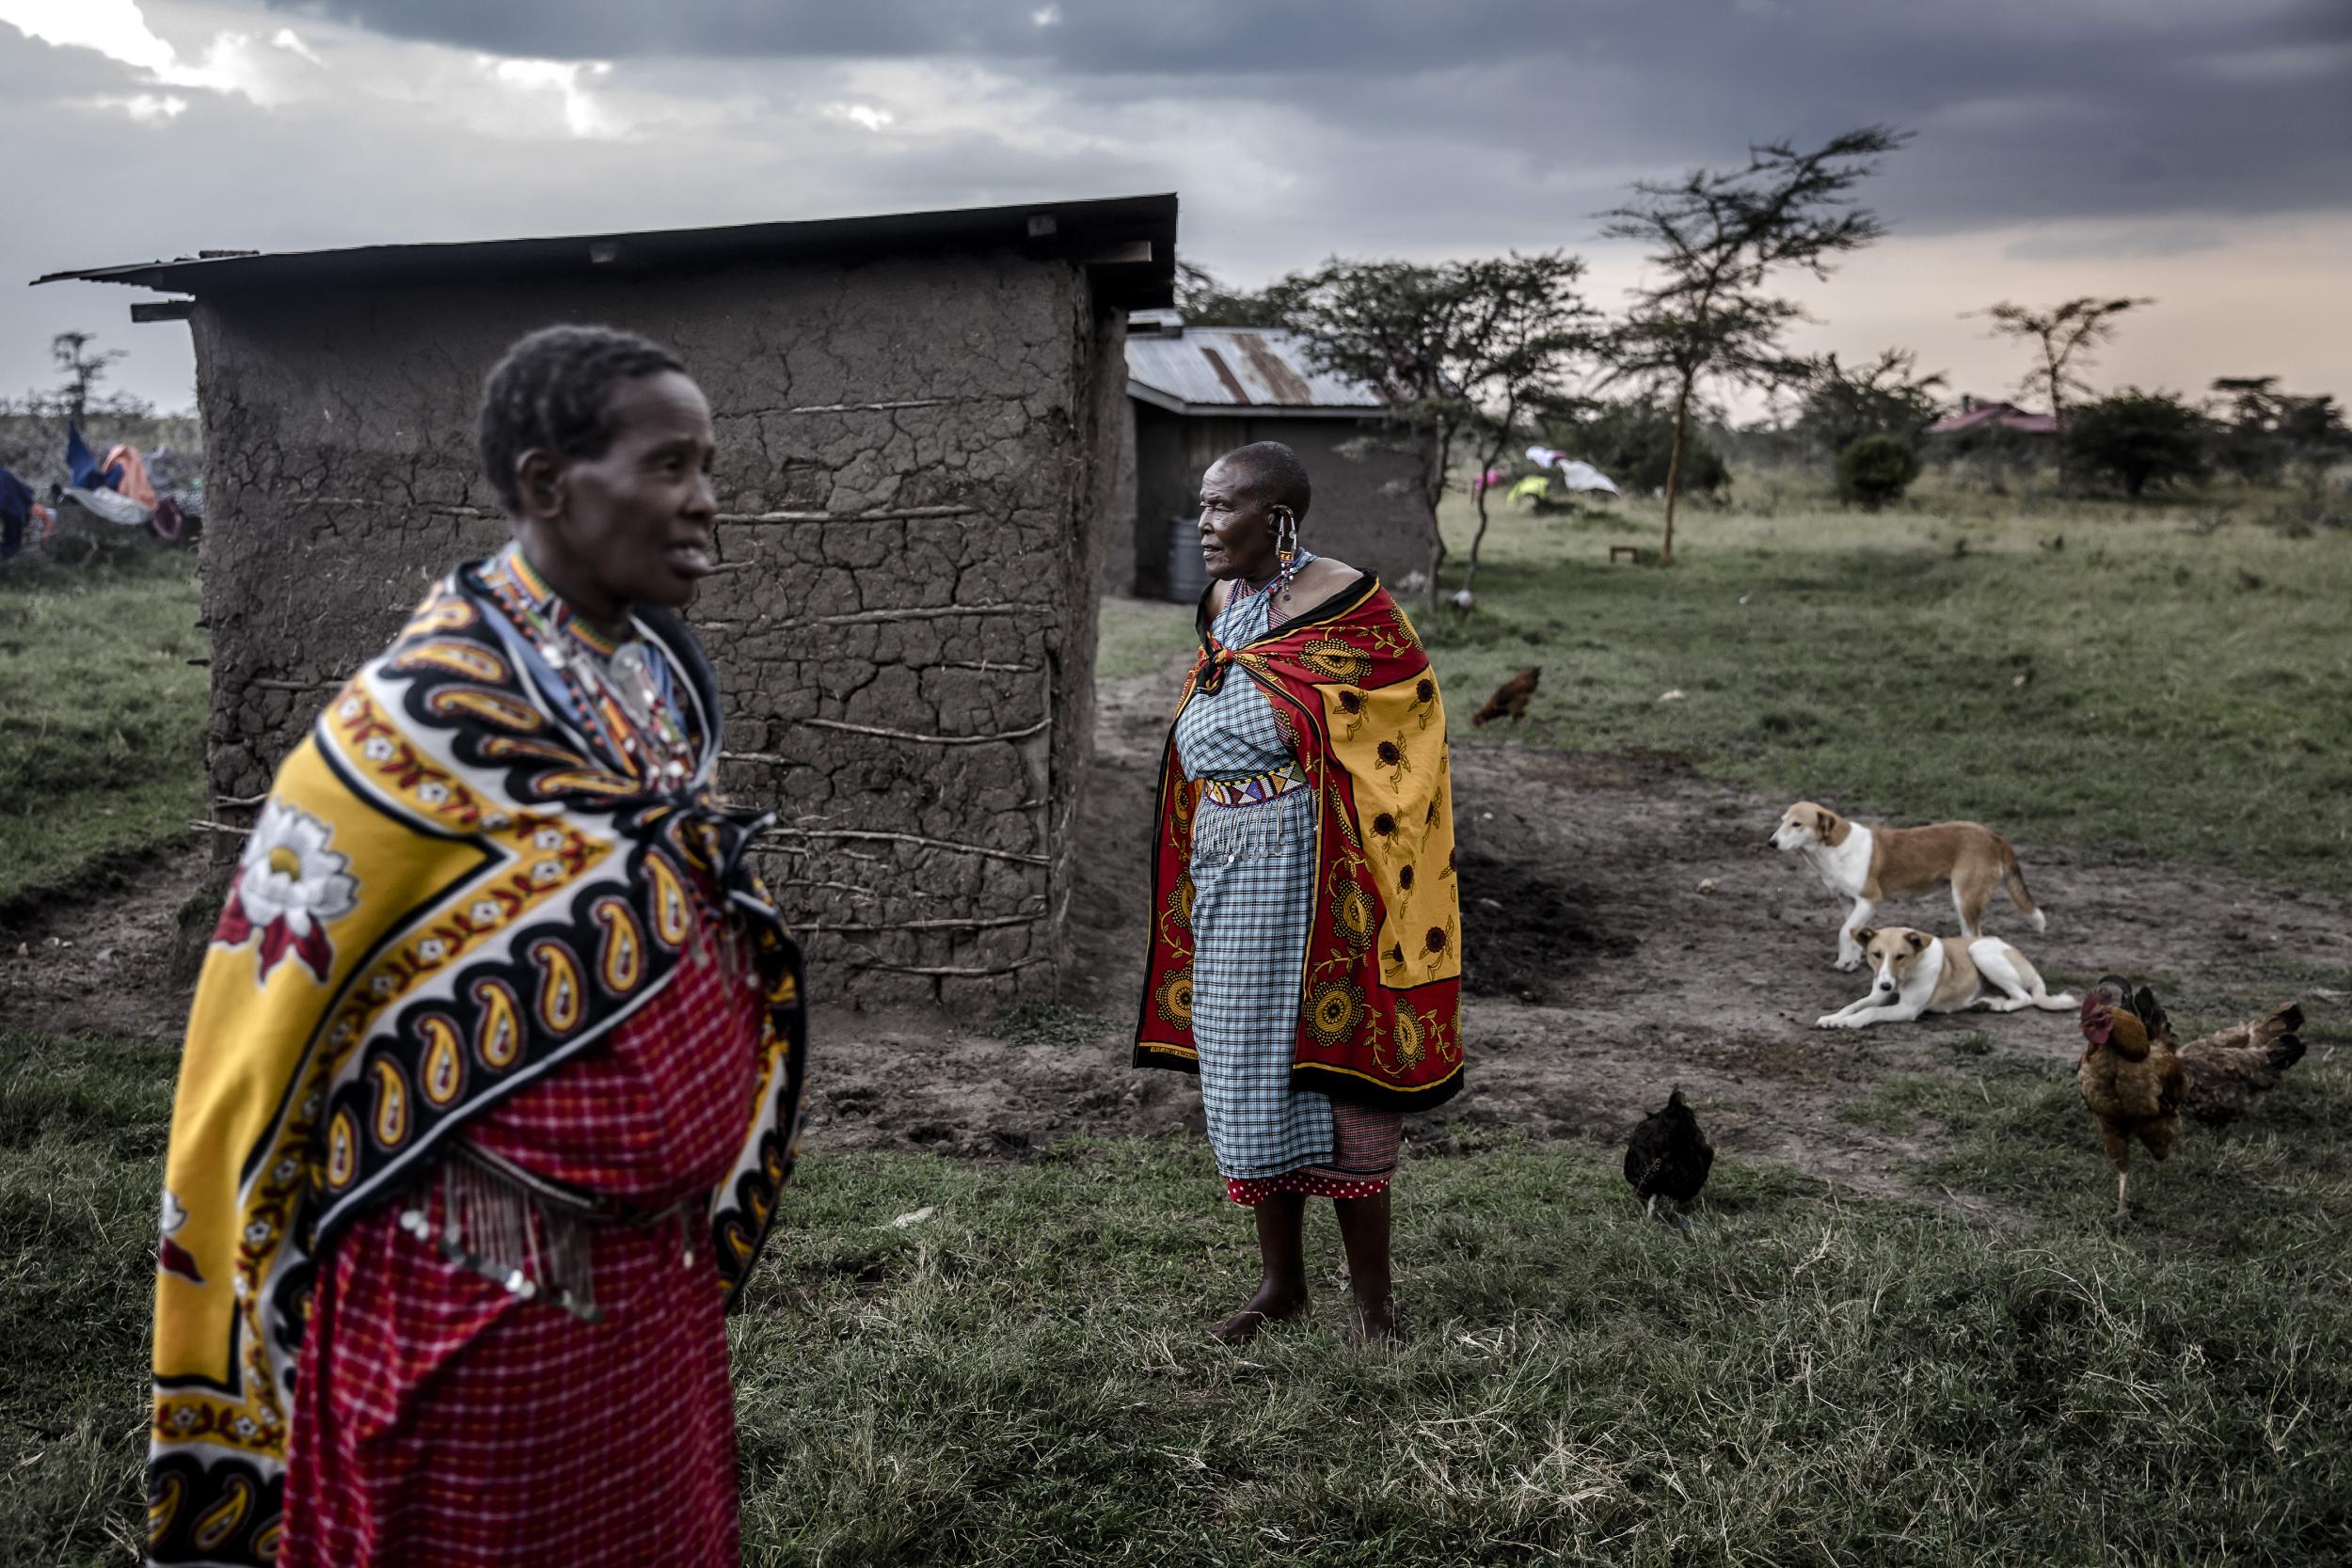 Dewal Sengeny, left, and her mother, Koko Sengeny, rely on the tourism dollars that support a conservancy